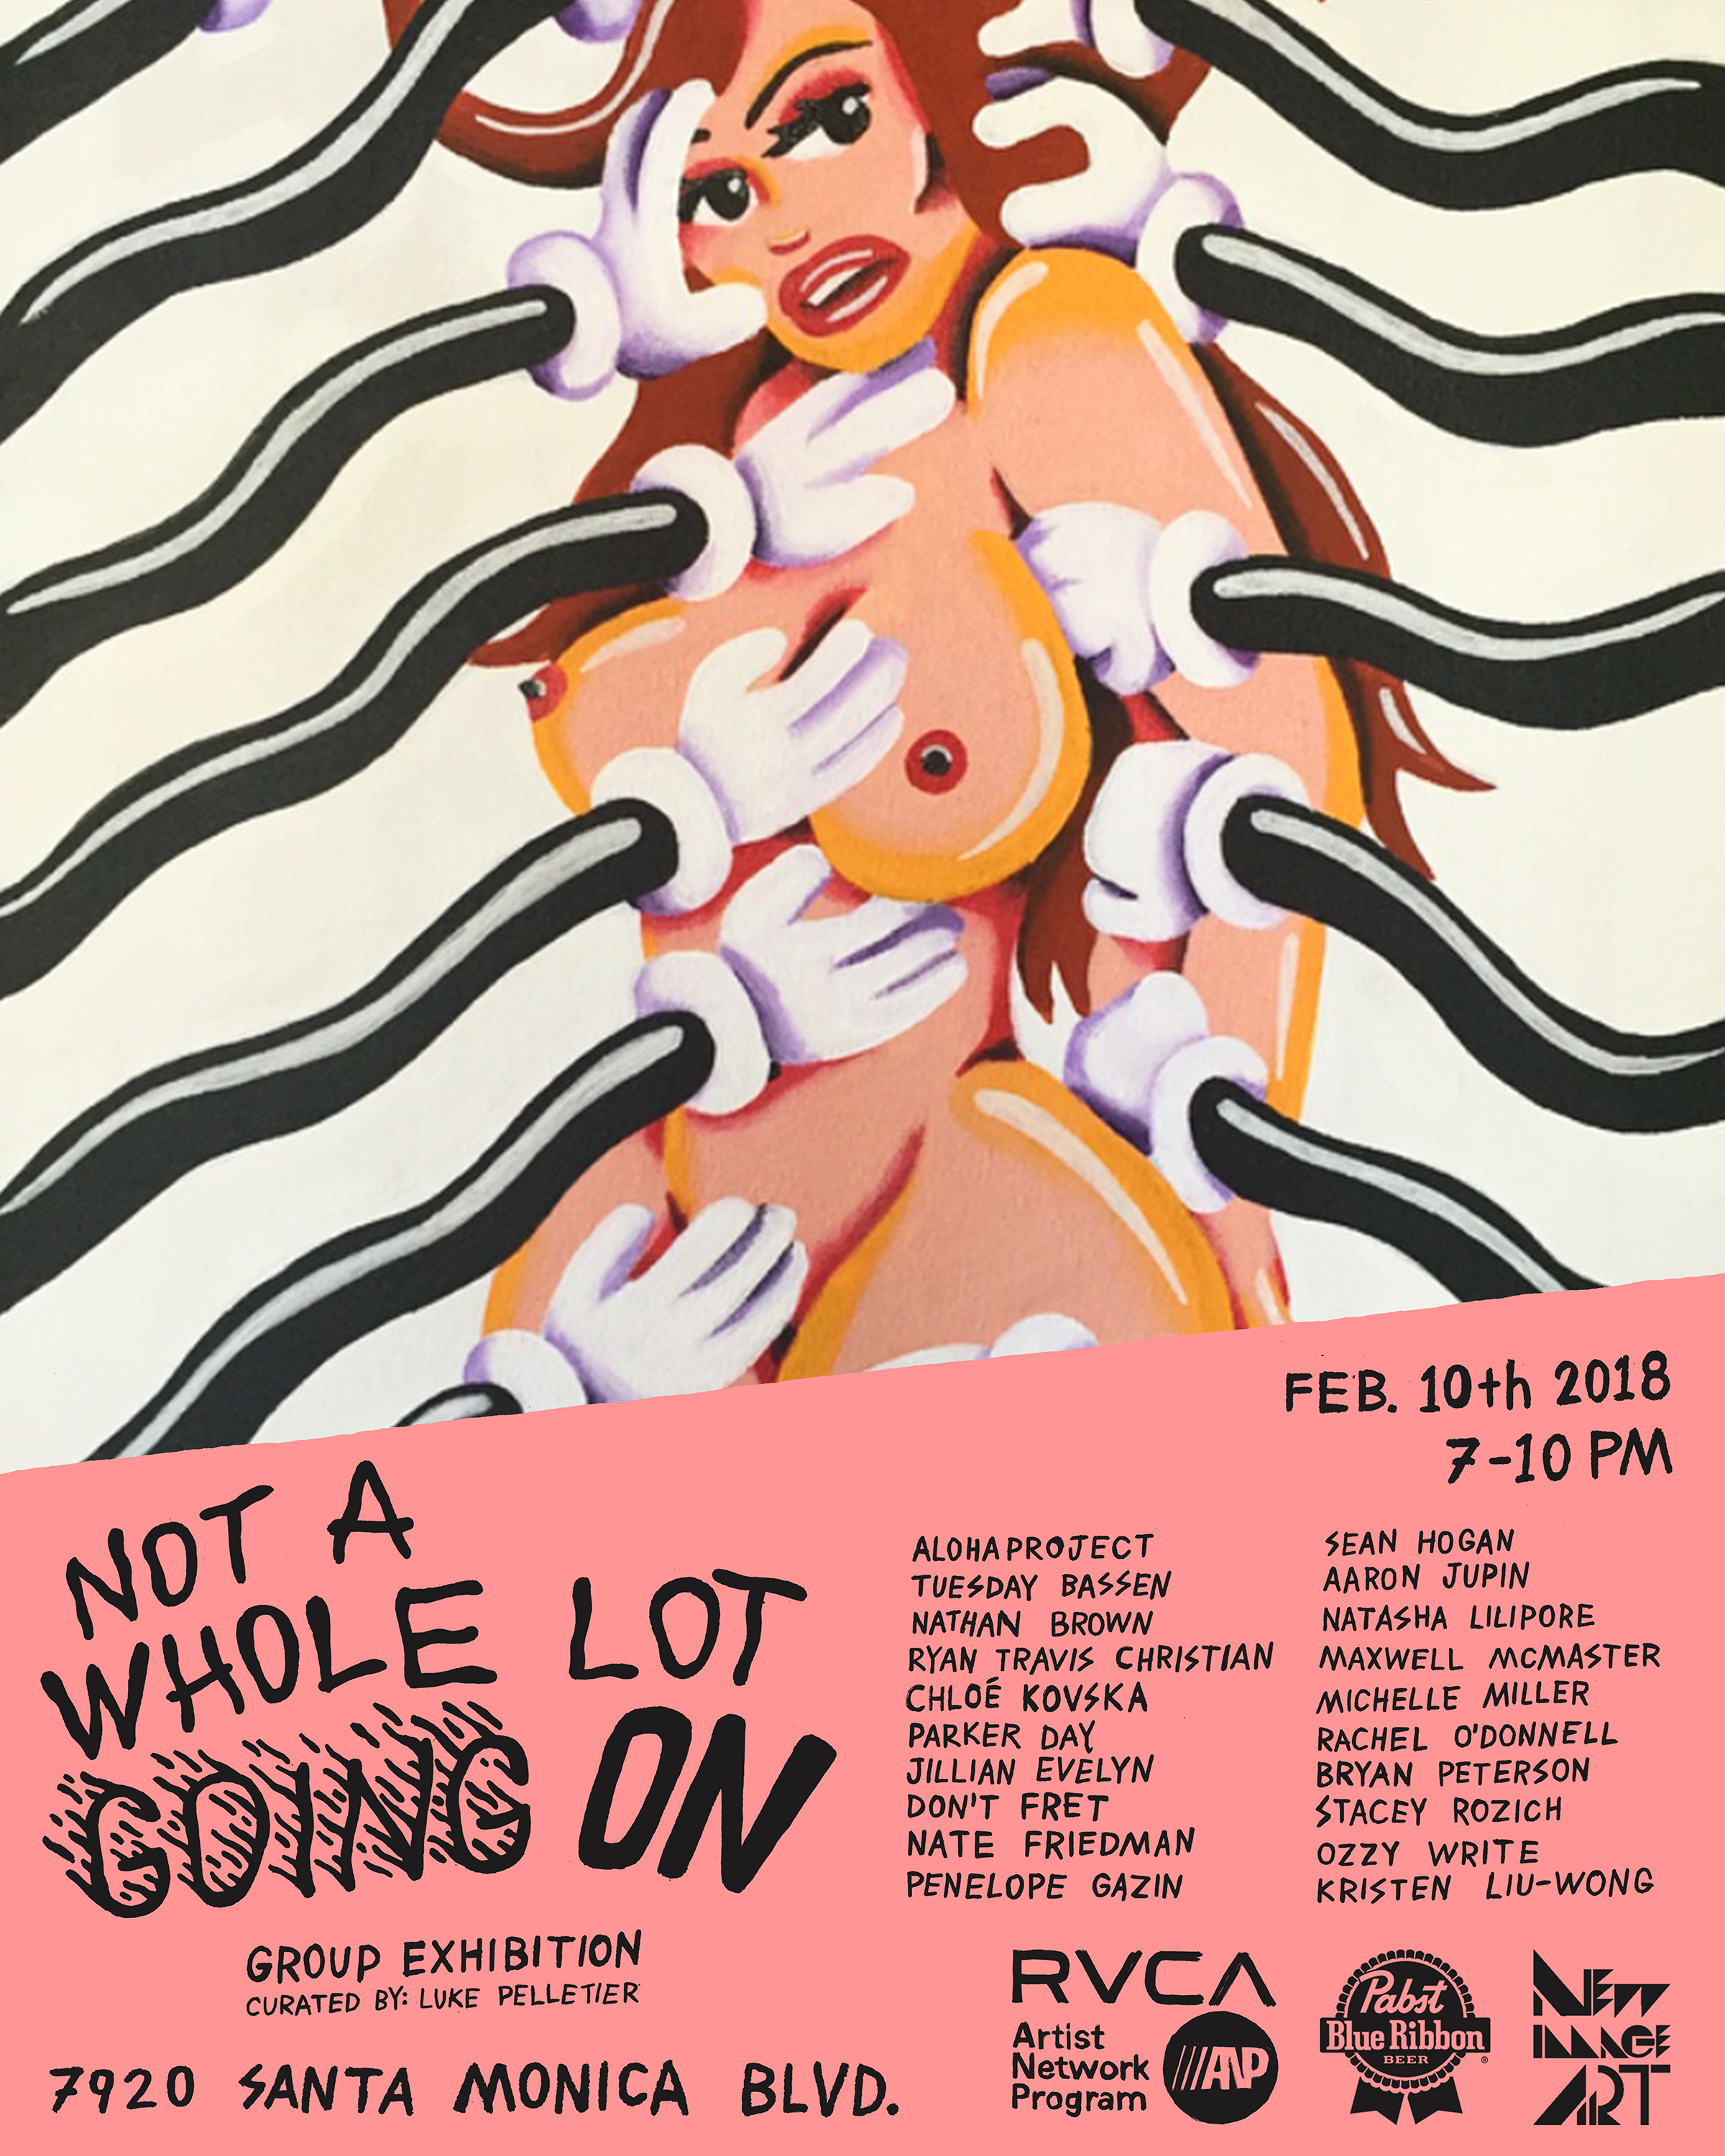 GROUP EXHIBITION - NOT A WHOLE LOT GOING ON